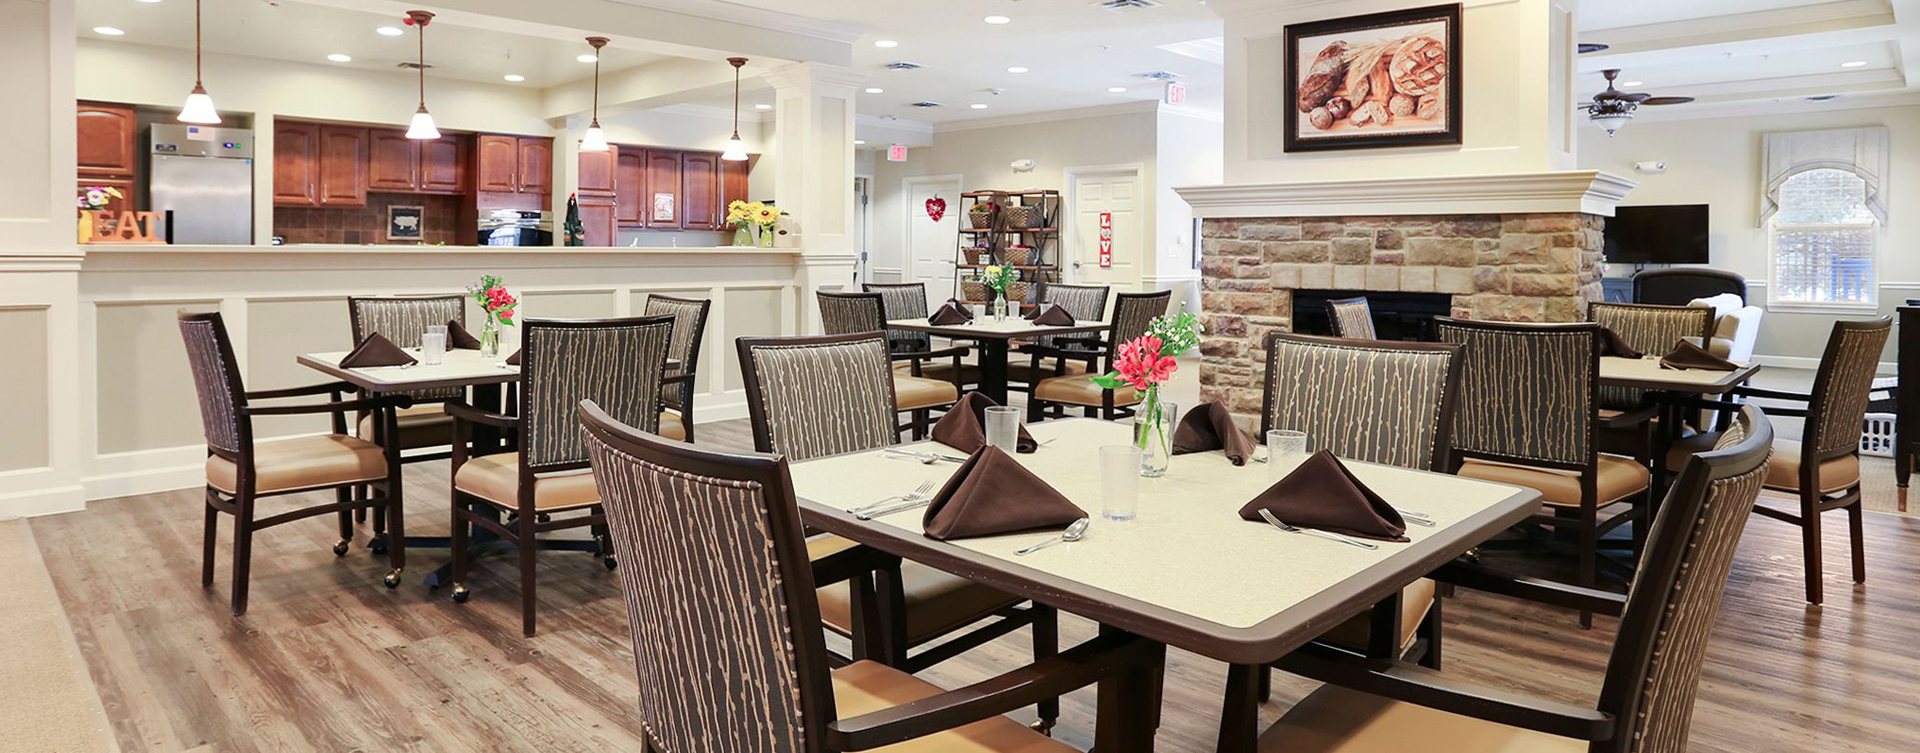 Mary B’s country kitchen evokes a sense of home and reconnects residents to past life skills at Bickford of Champaign